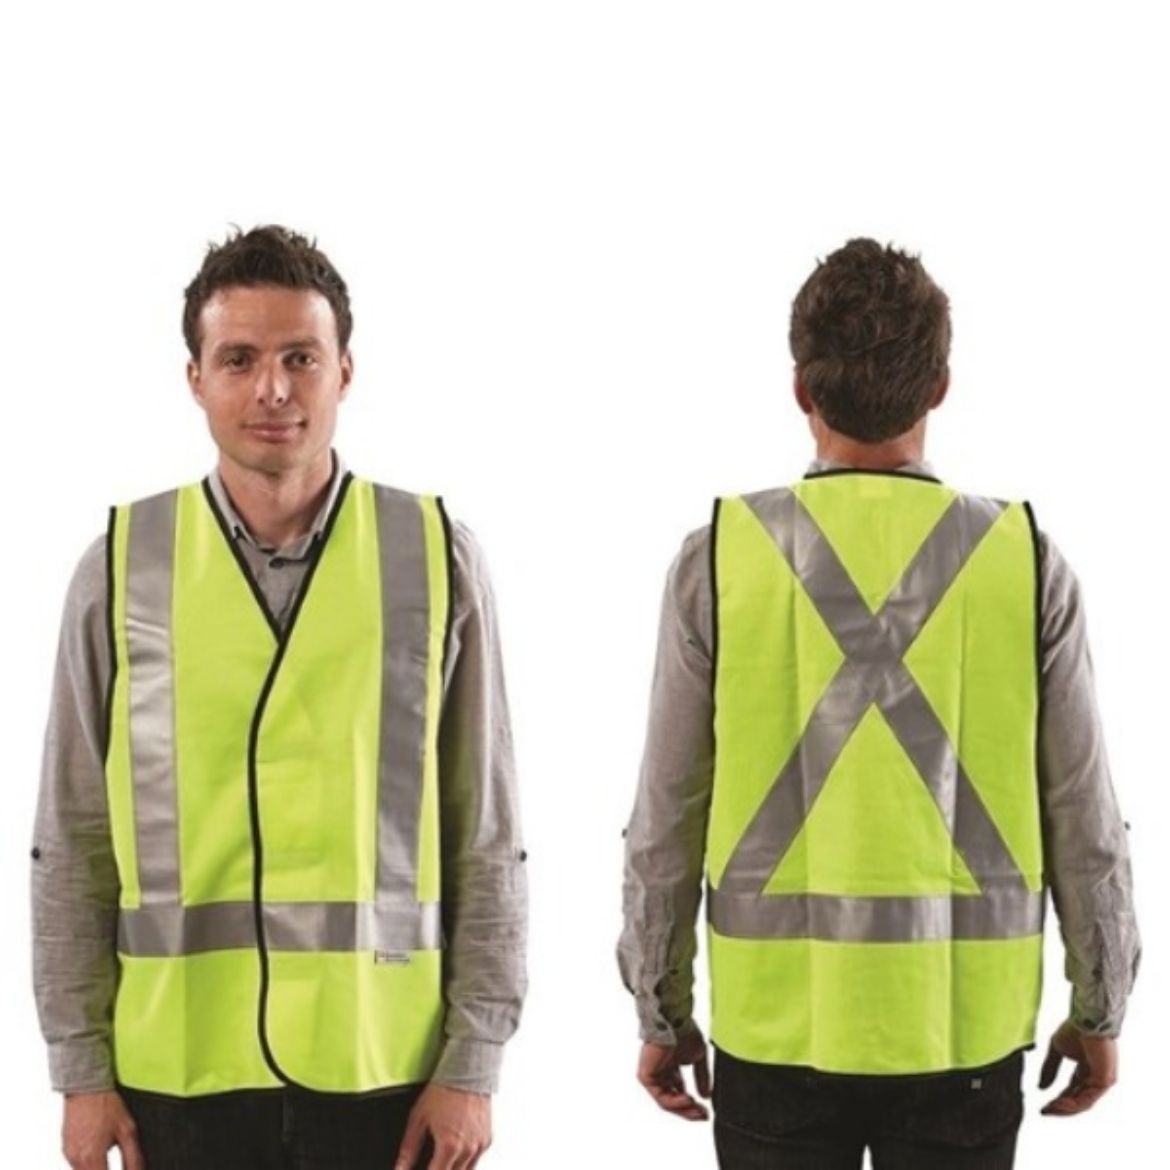 Picture of YELLOW VEST DAY/NIGHT USE VEST WITH X BACK PATTERN REFLECTIVE TAPE. AVAILABLE IN S/M/L/XL/2XL/3XL/4XL